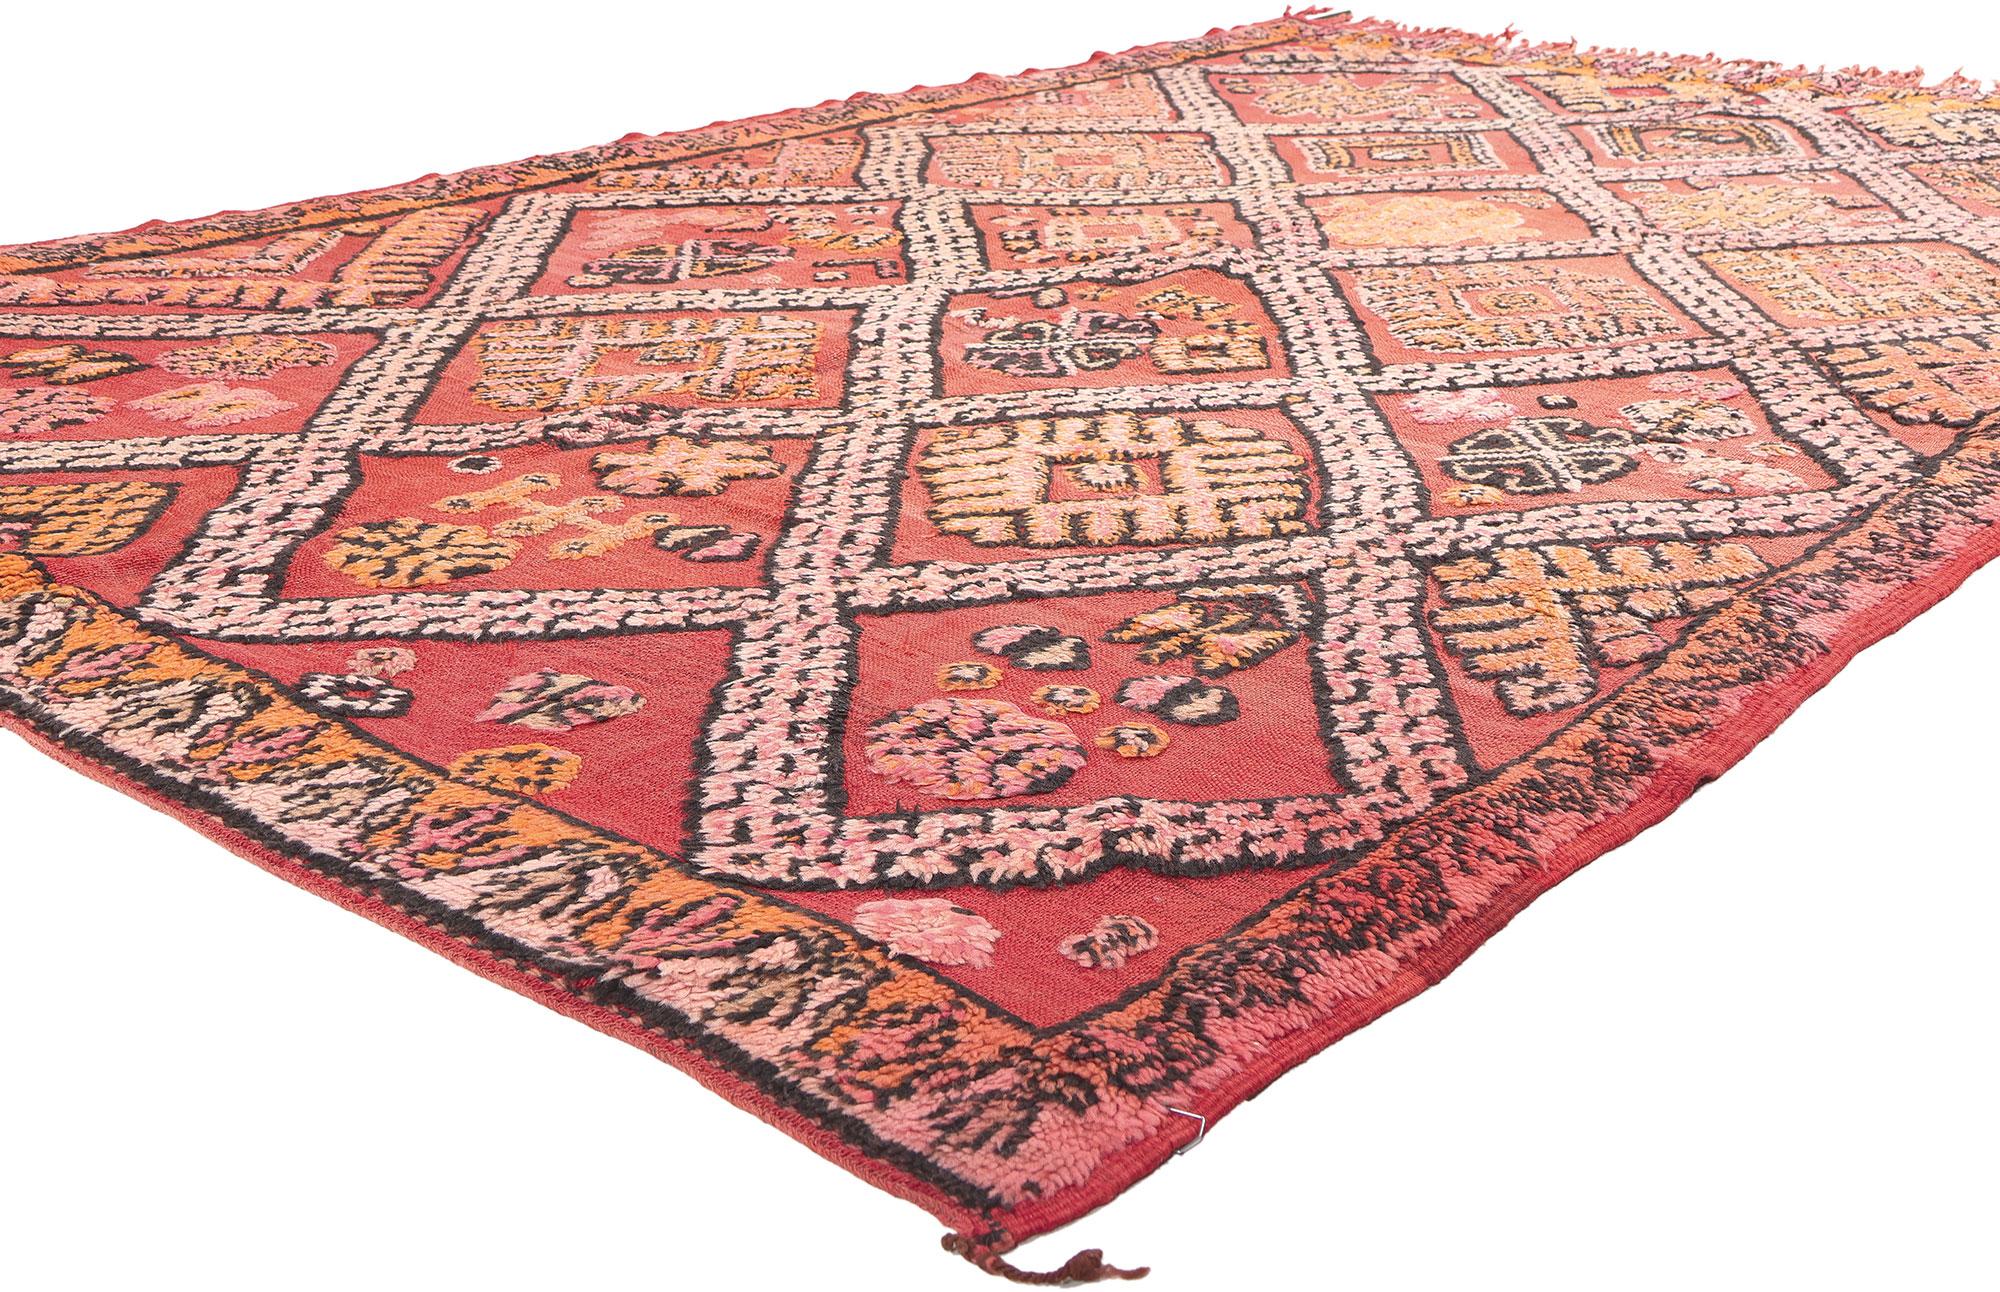 20369 Vintage Taznakht Moroccan Kilim Rug, 05'10 x 09'05. 

Behold the timeless beauty of this vintage Taznakht Moroccan kilim rug, a testament to distinctive weaving styles that seamlessly blend knotting and flat weaving, giving rise to mesmerizing